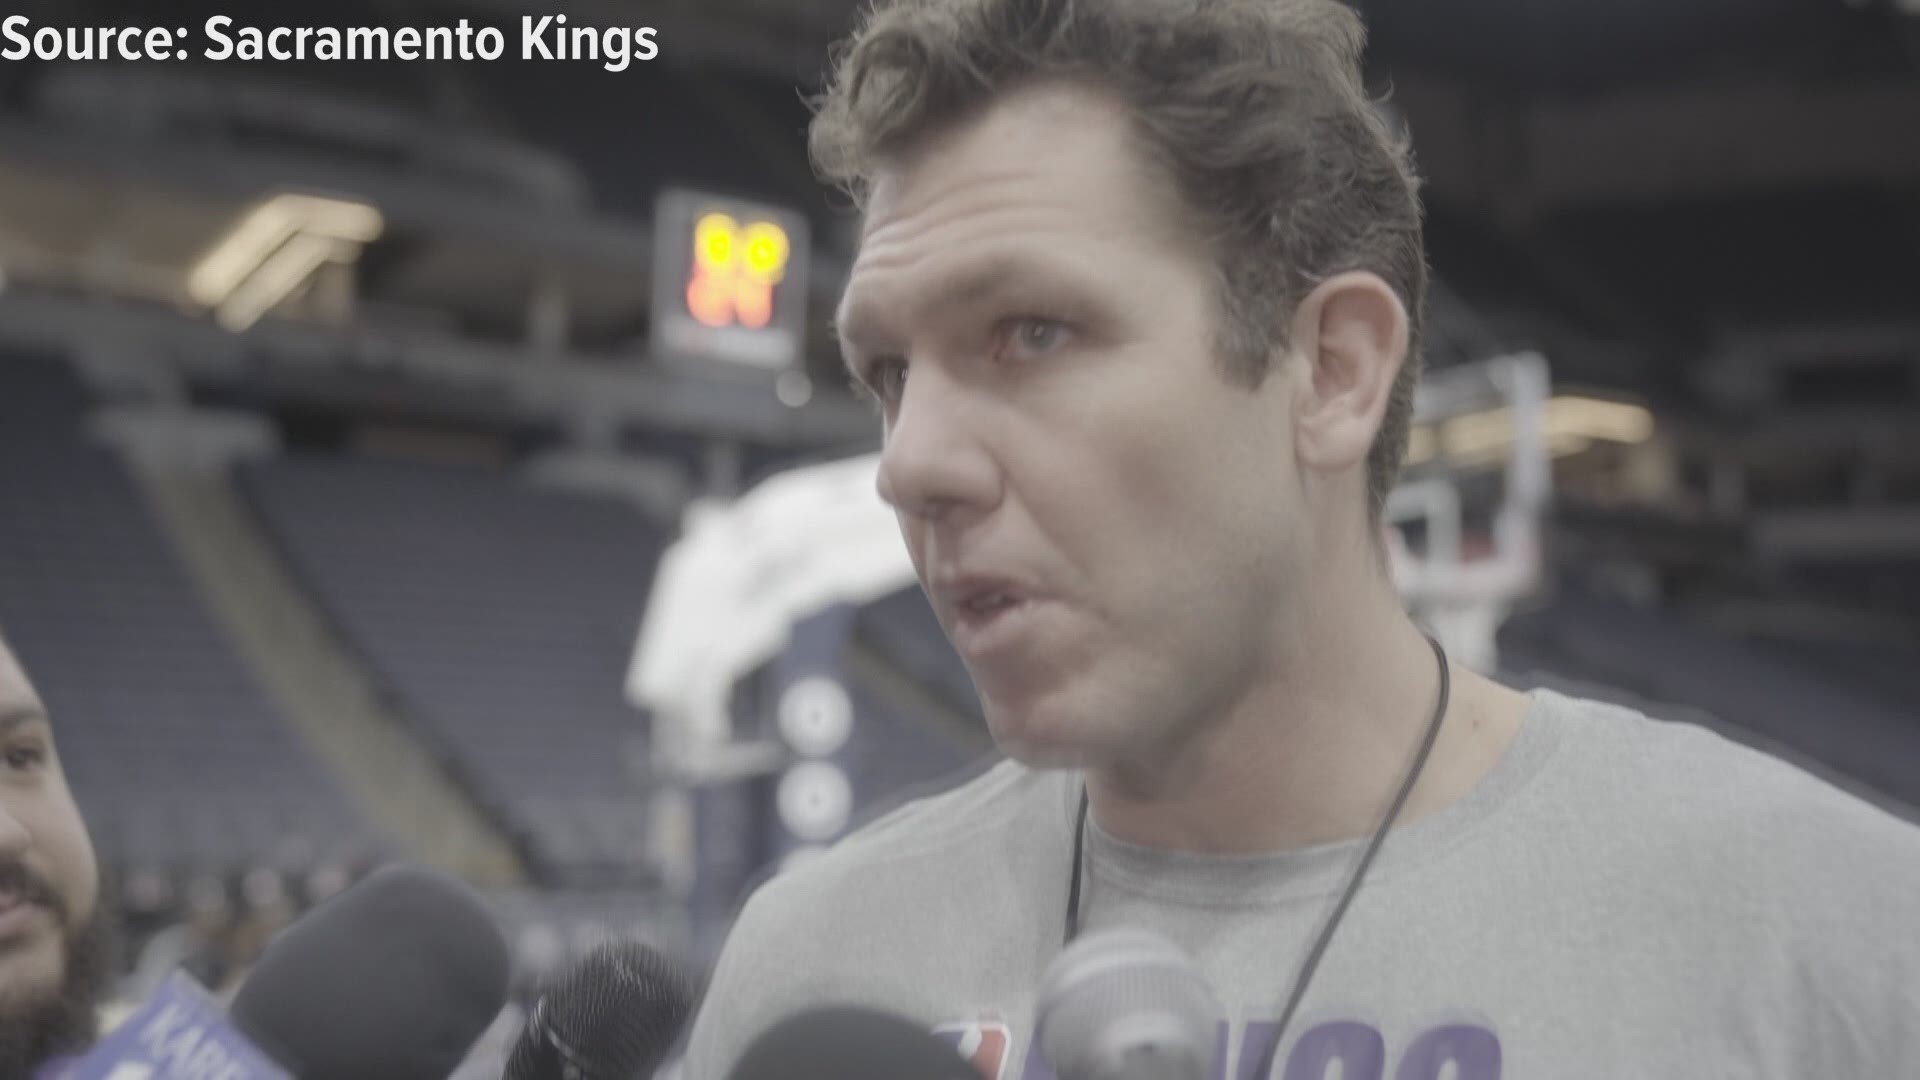 Sacramento Kings coach Luke Walton gives his thoughts on the passing of his friend and former teammate Kobe Bryant.